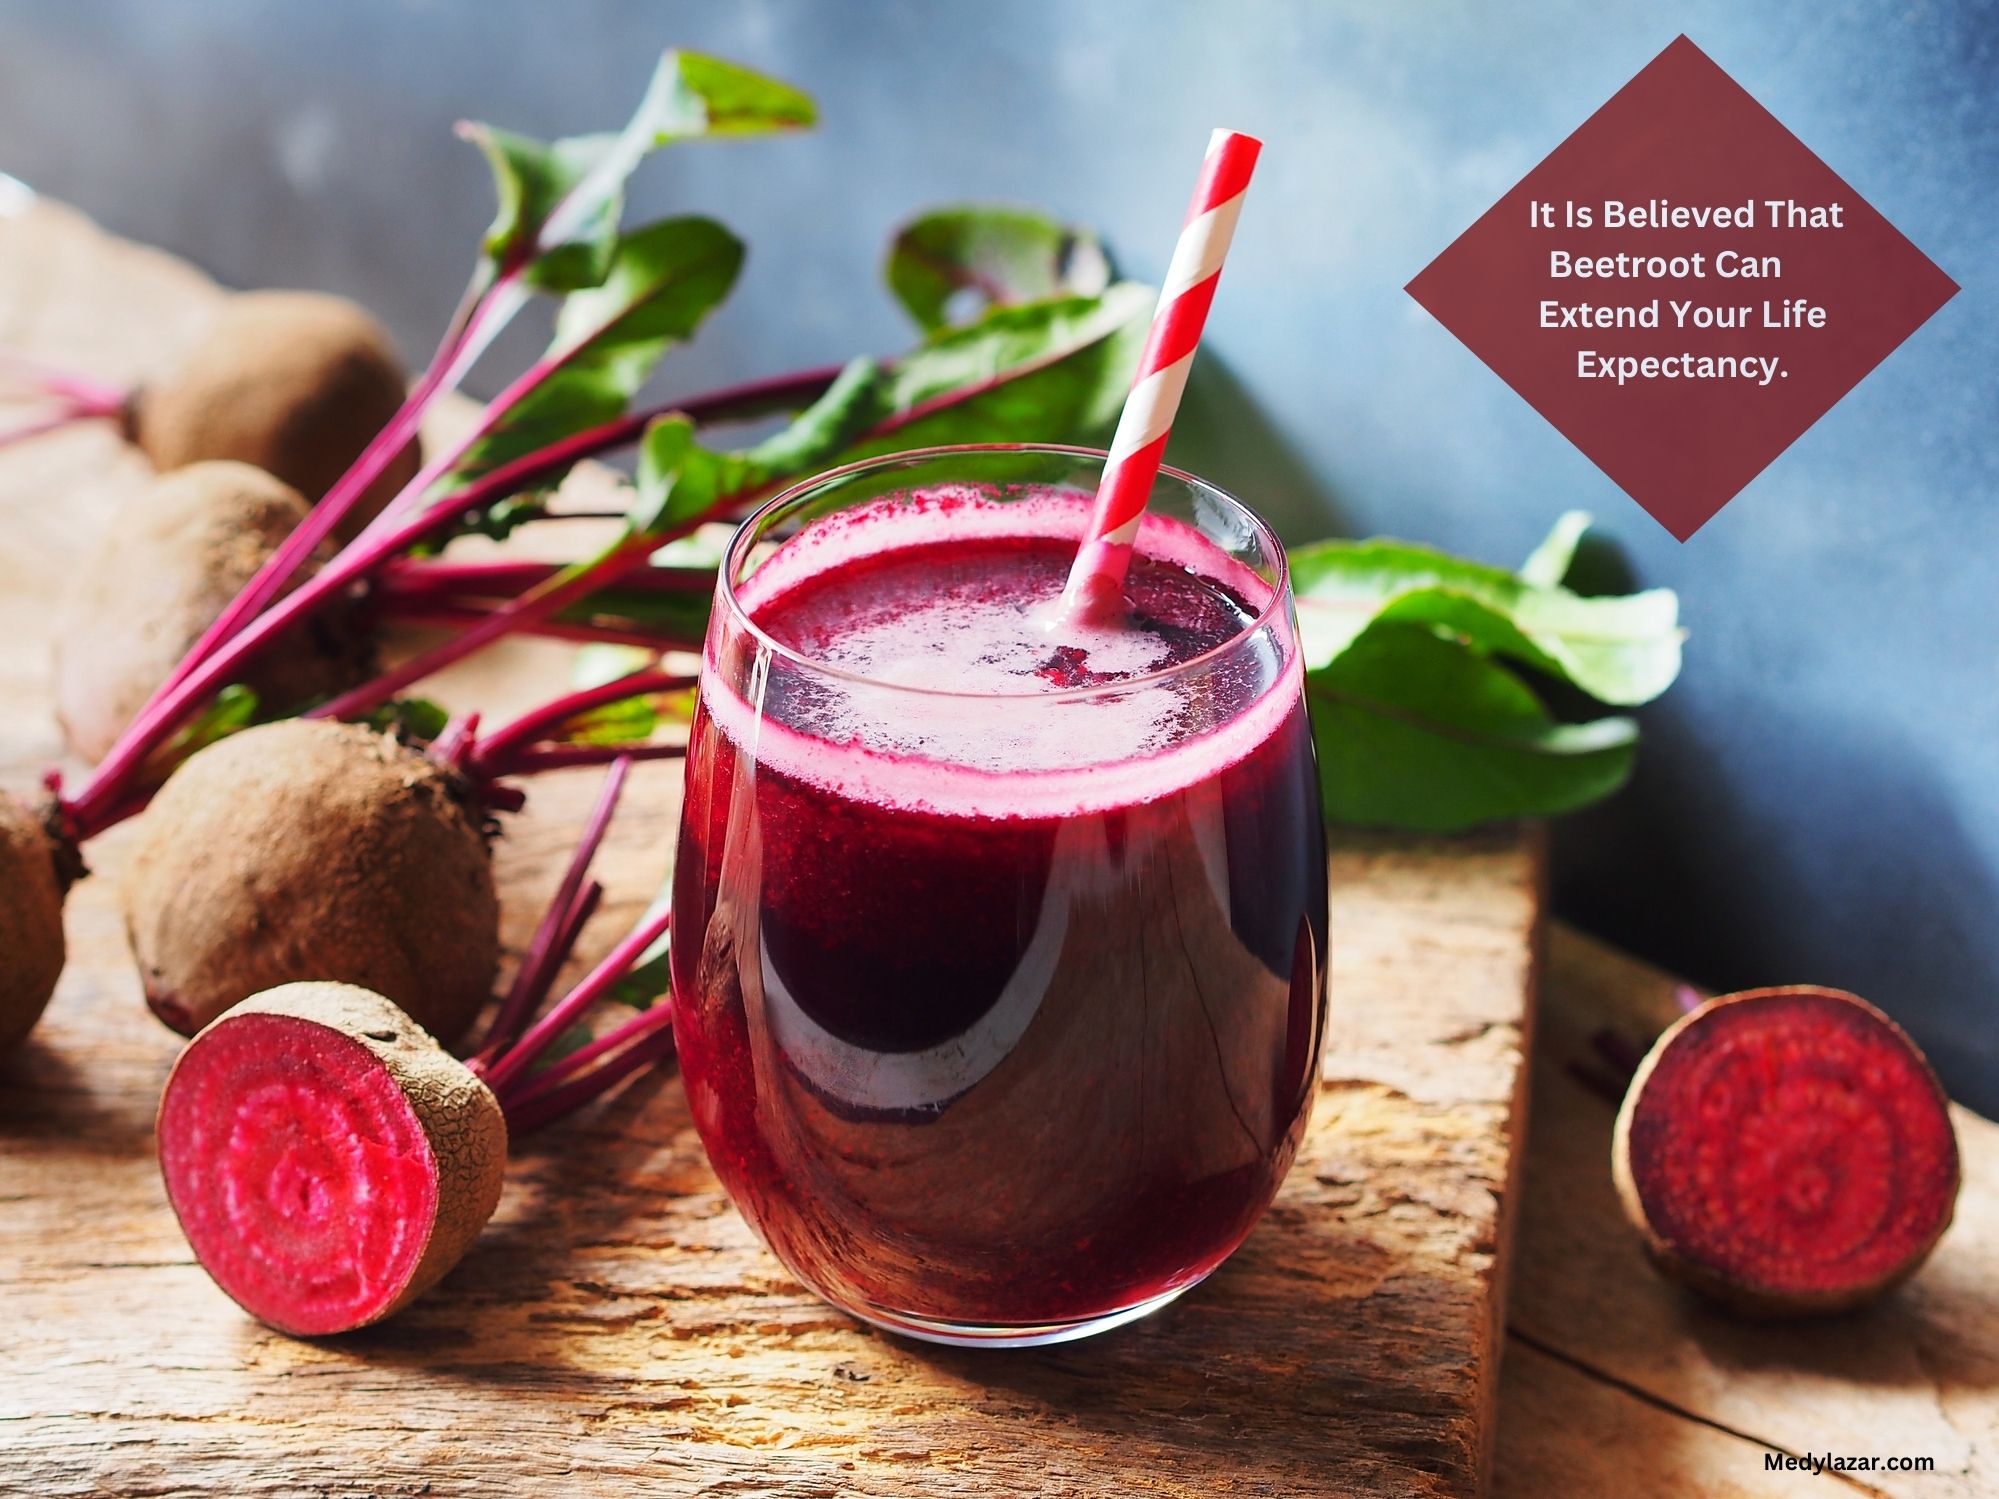 It Is Believed That Beetroot Can Extend Your Life Expectancy.